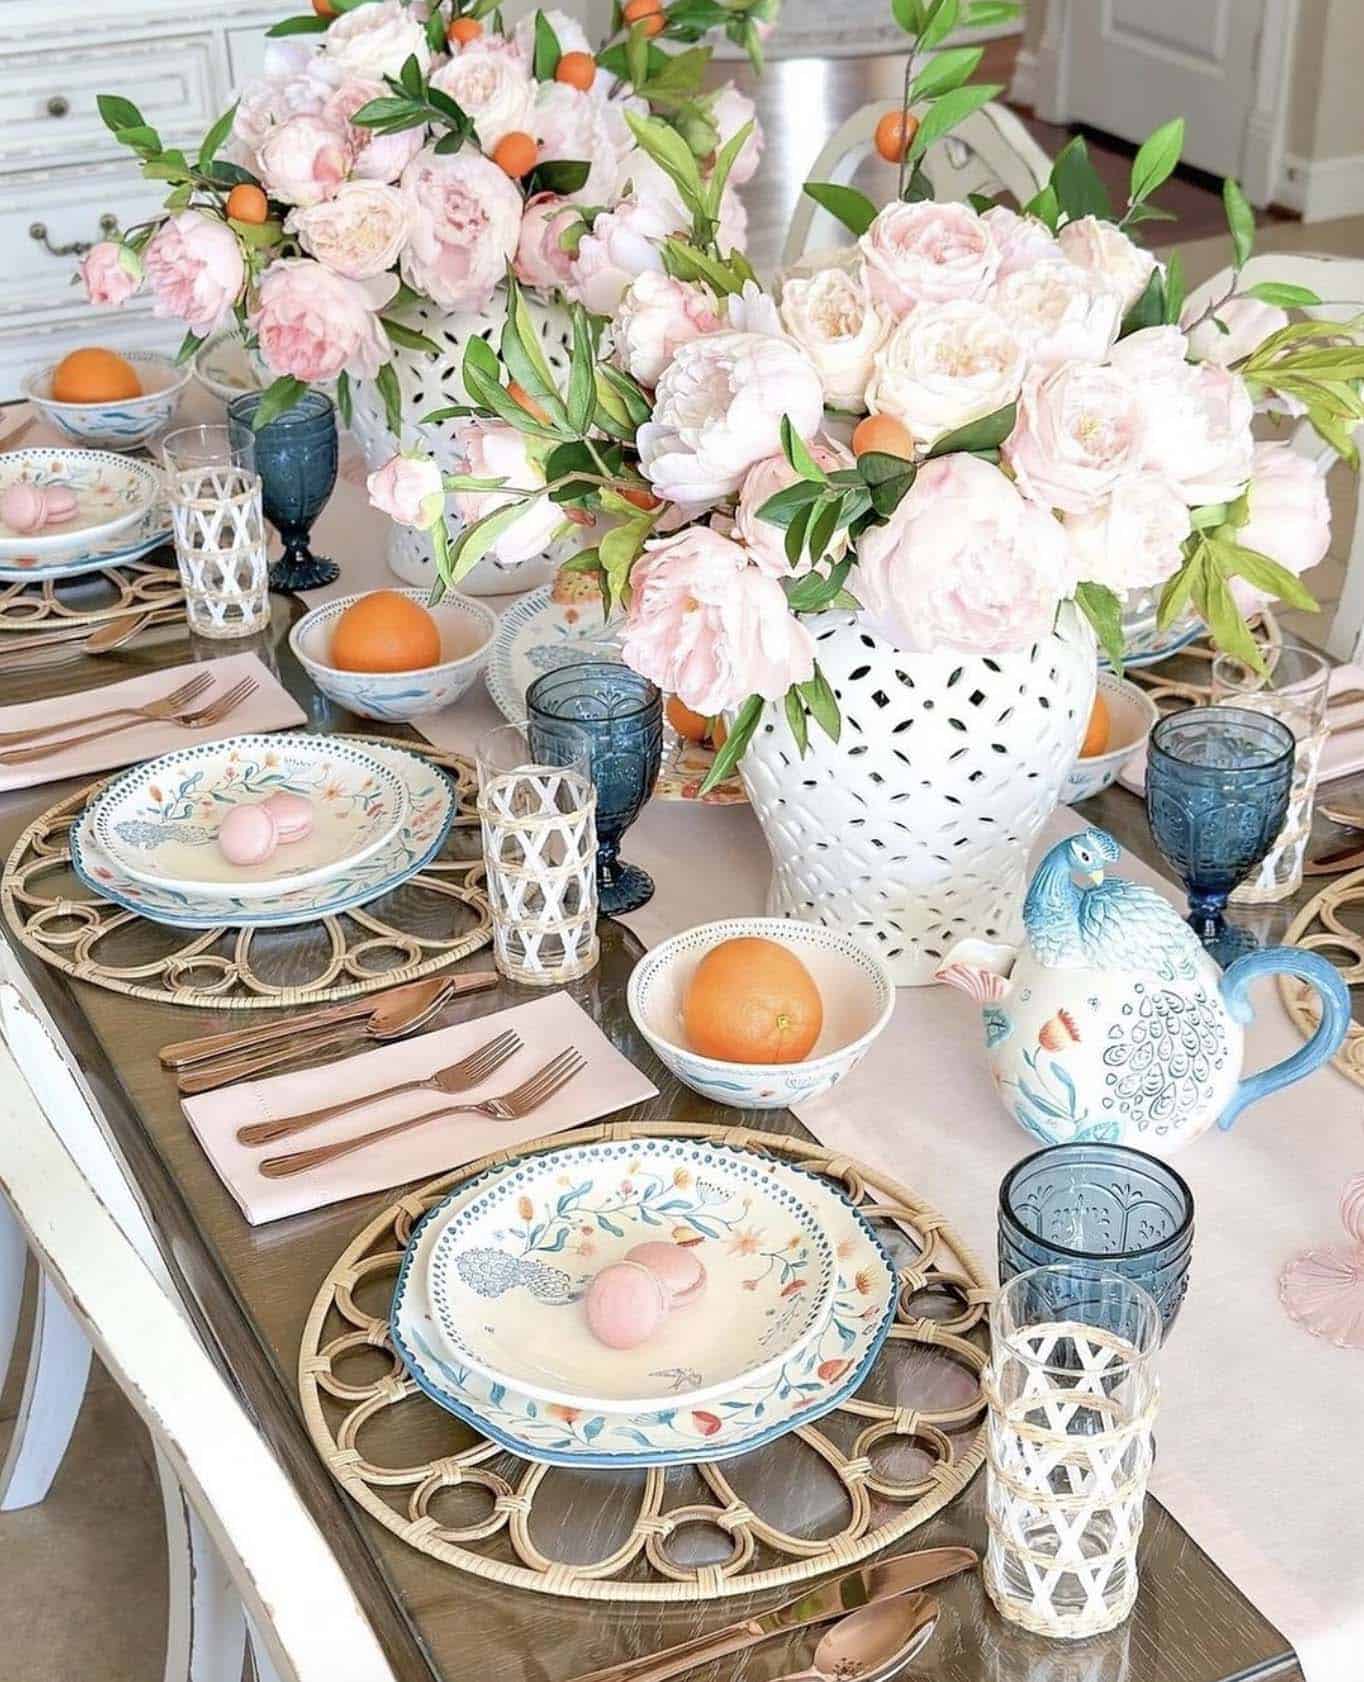 spring dining table decor with a color scheme of soft pink, blue, and a pop of orange